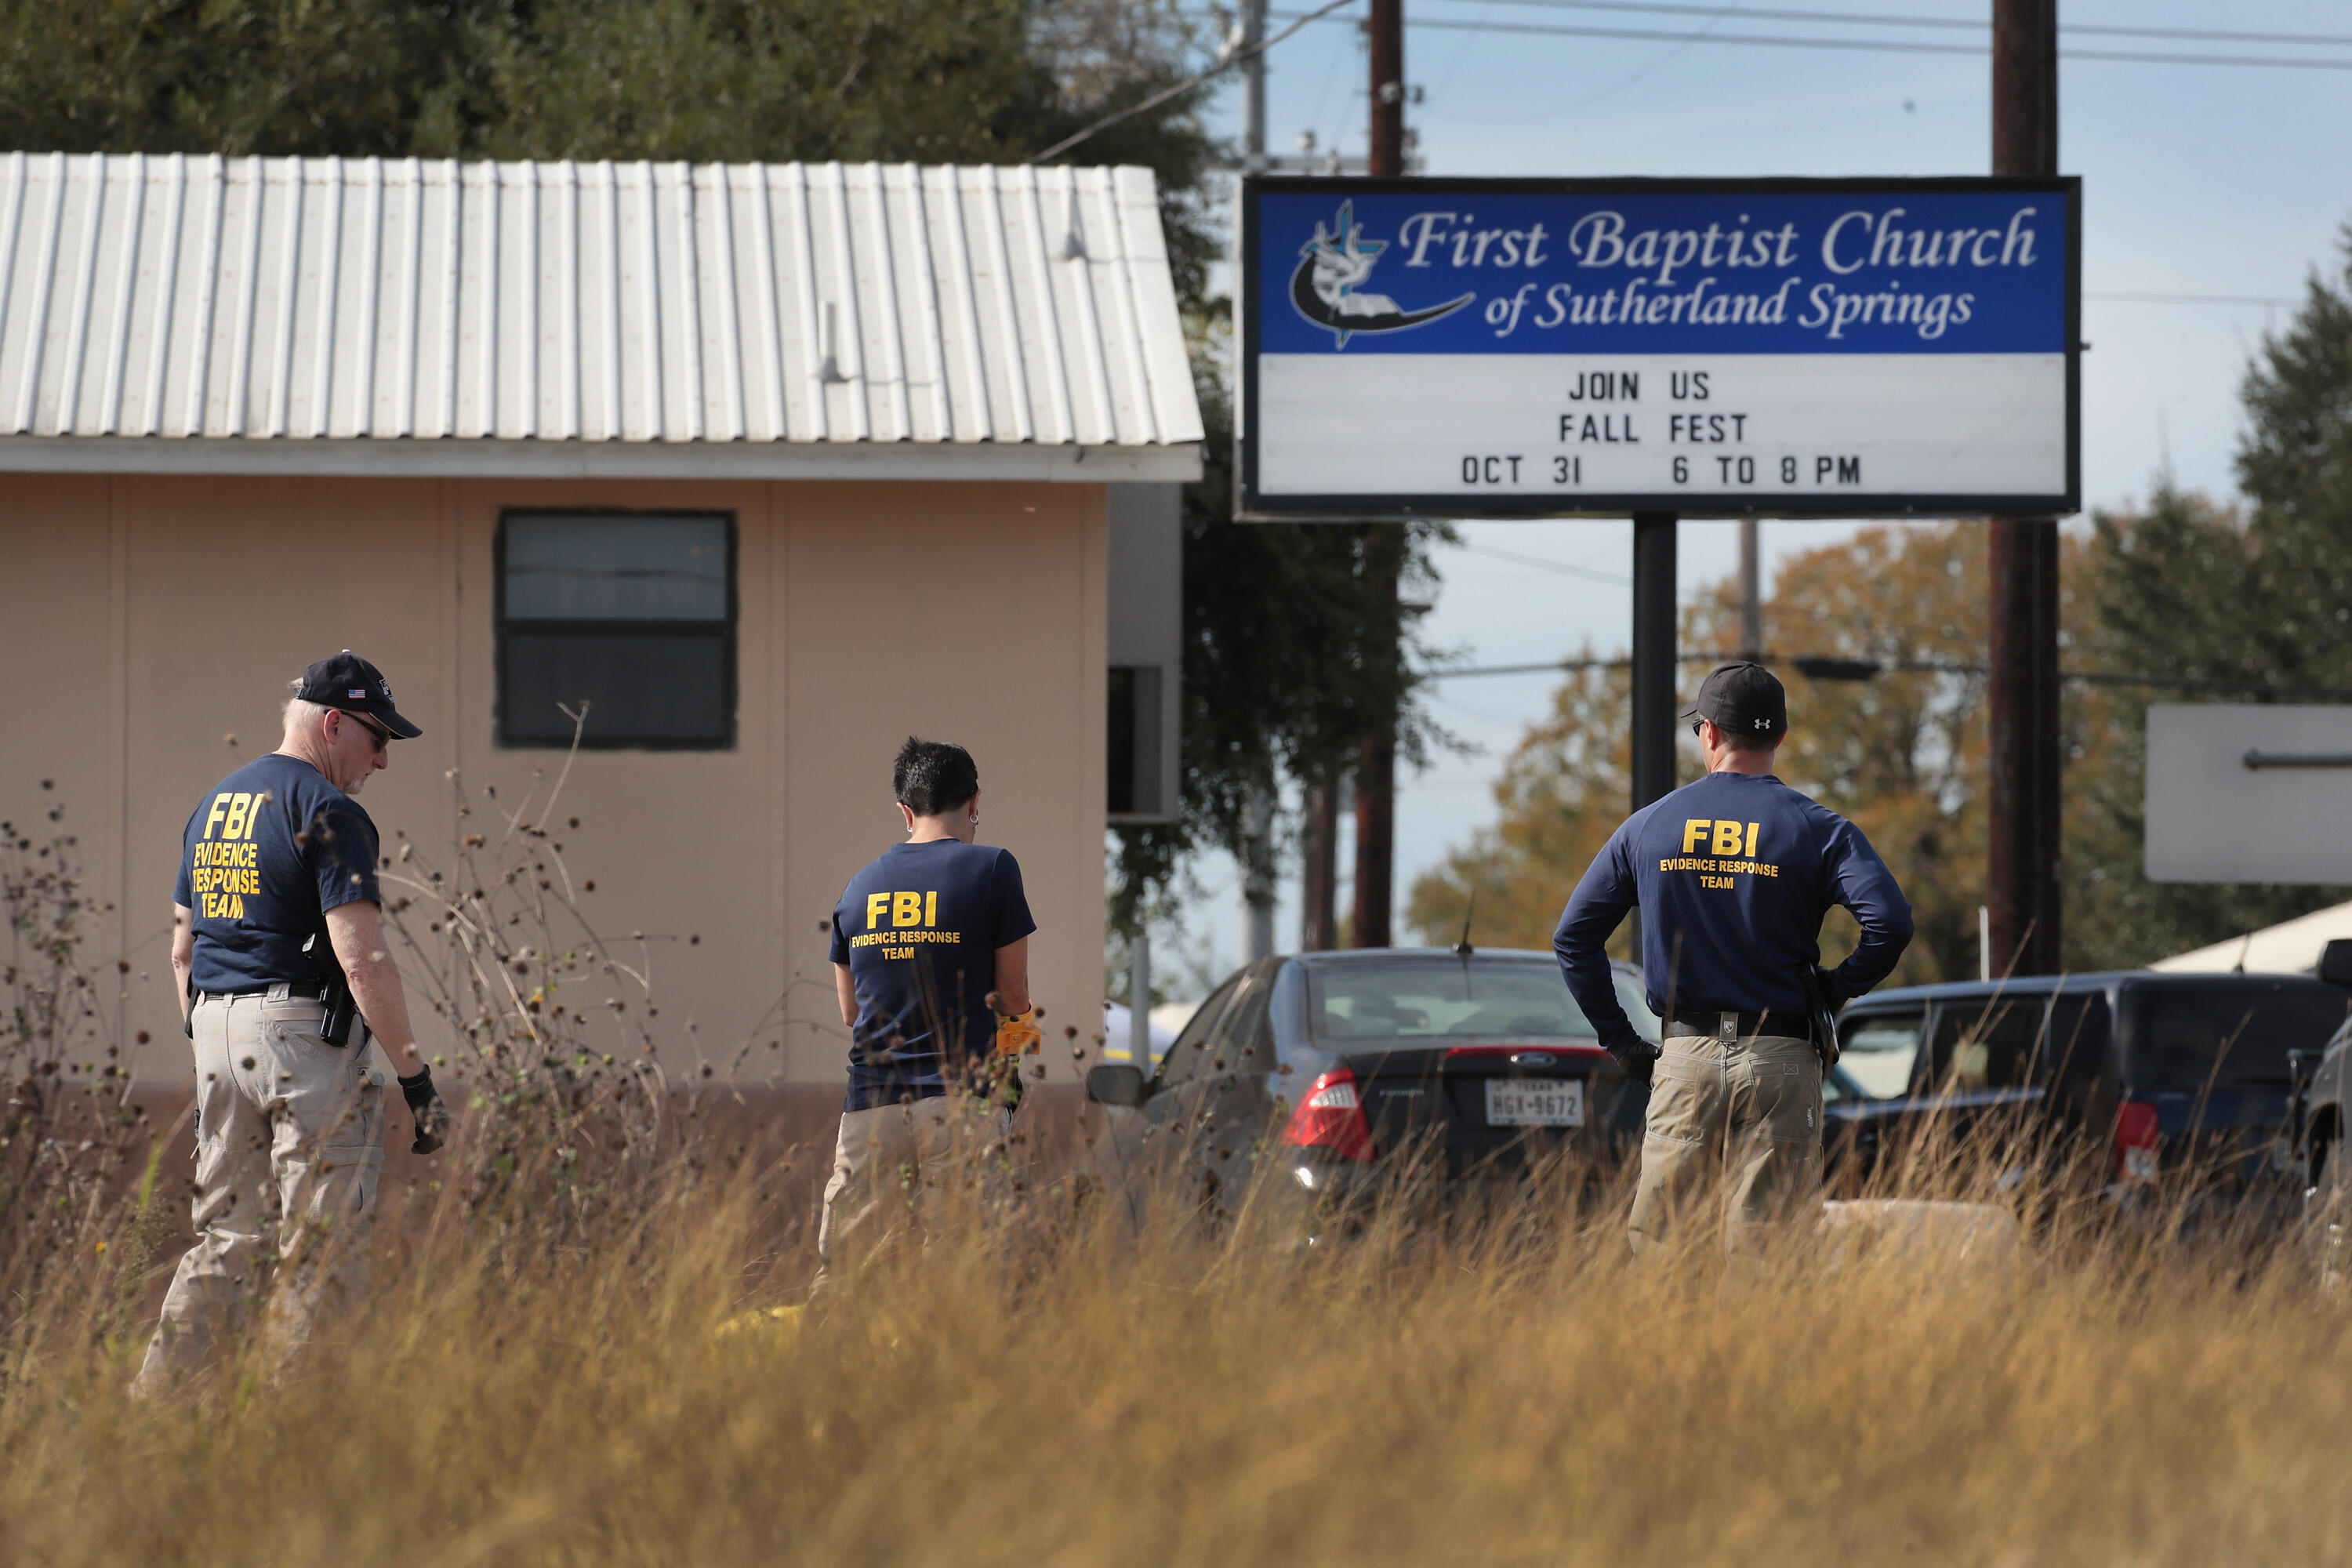 SUTHERLAND SPRINGS, TX - NOVEMBER 06: Law enforcement officials continue their investigation at the First Baptist Church of Sutherland Springs on November 6, 2017, in Sutherland Springs, Texas. Yesterday a gunman, Devin Patrick Kelley, killed 26 people at the church and wounded 20 others when he opened fire during a Sunday service. (Photo by Scott Olson/Getty Images)